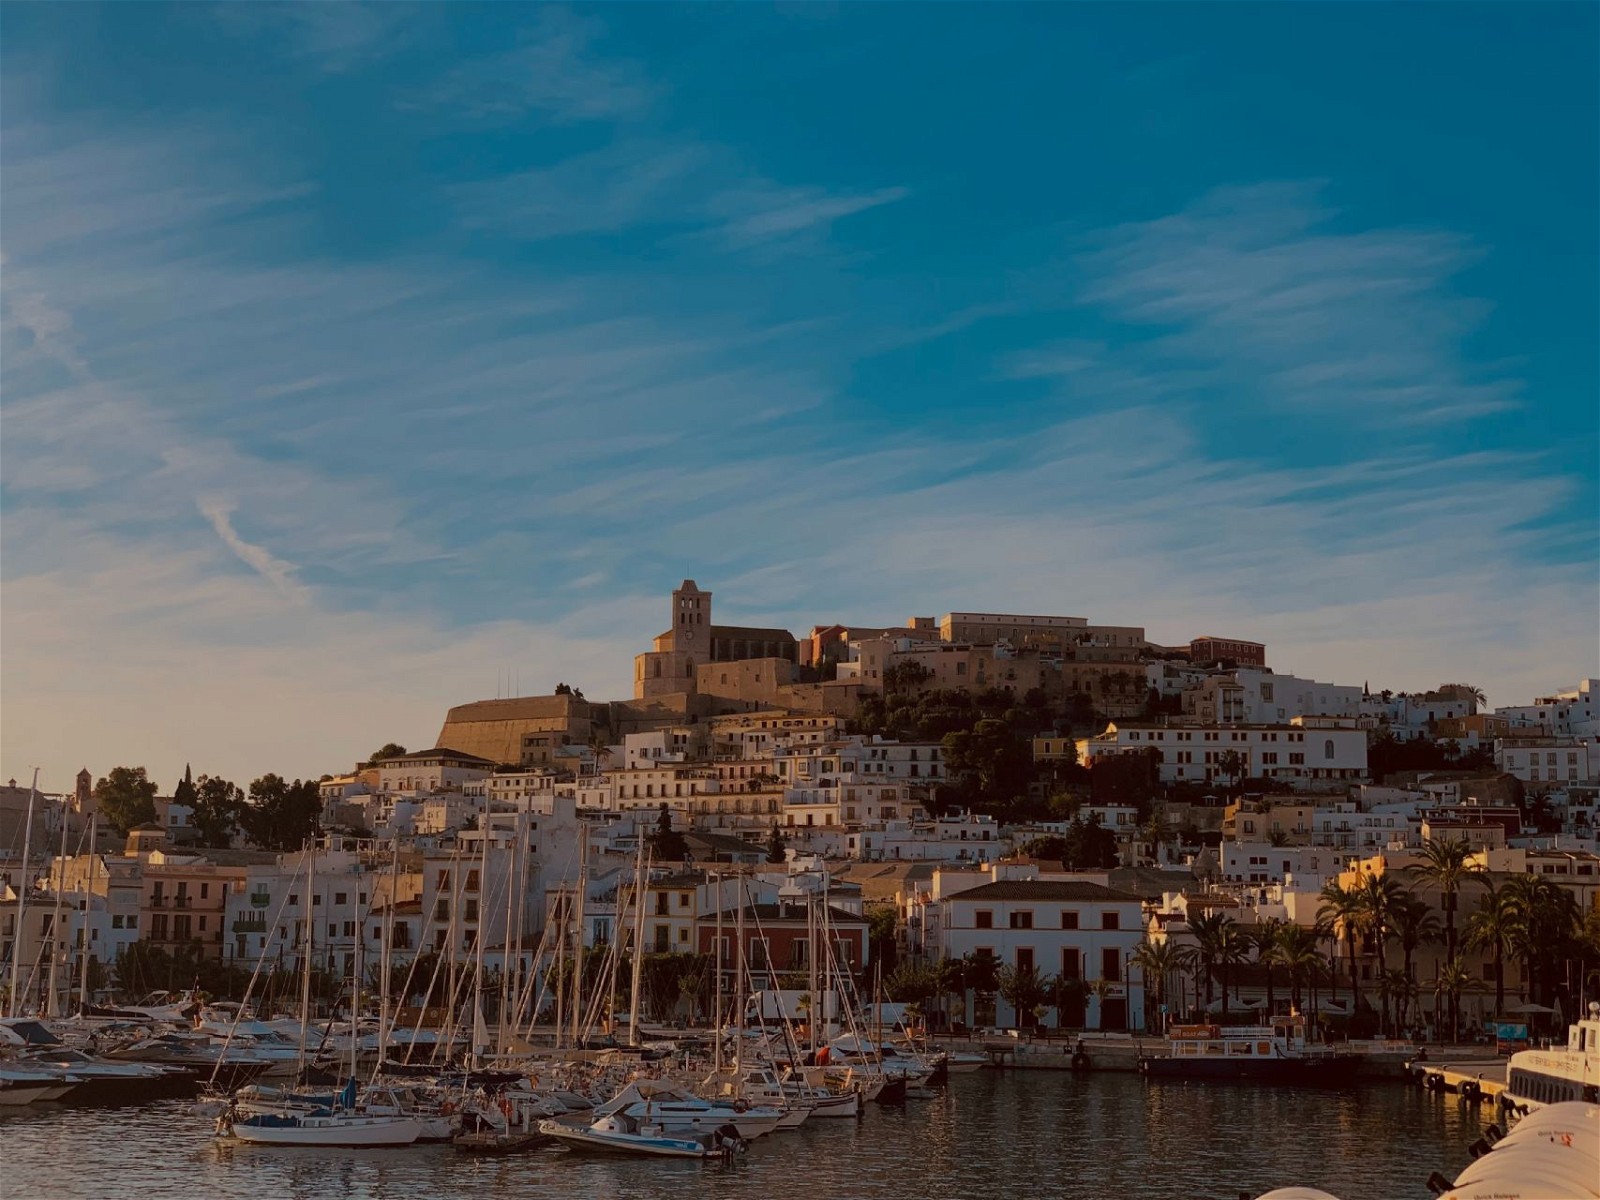 In conclusion, Ibiza is a beautiful island that offers something for everyone